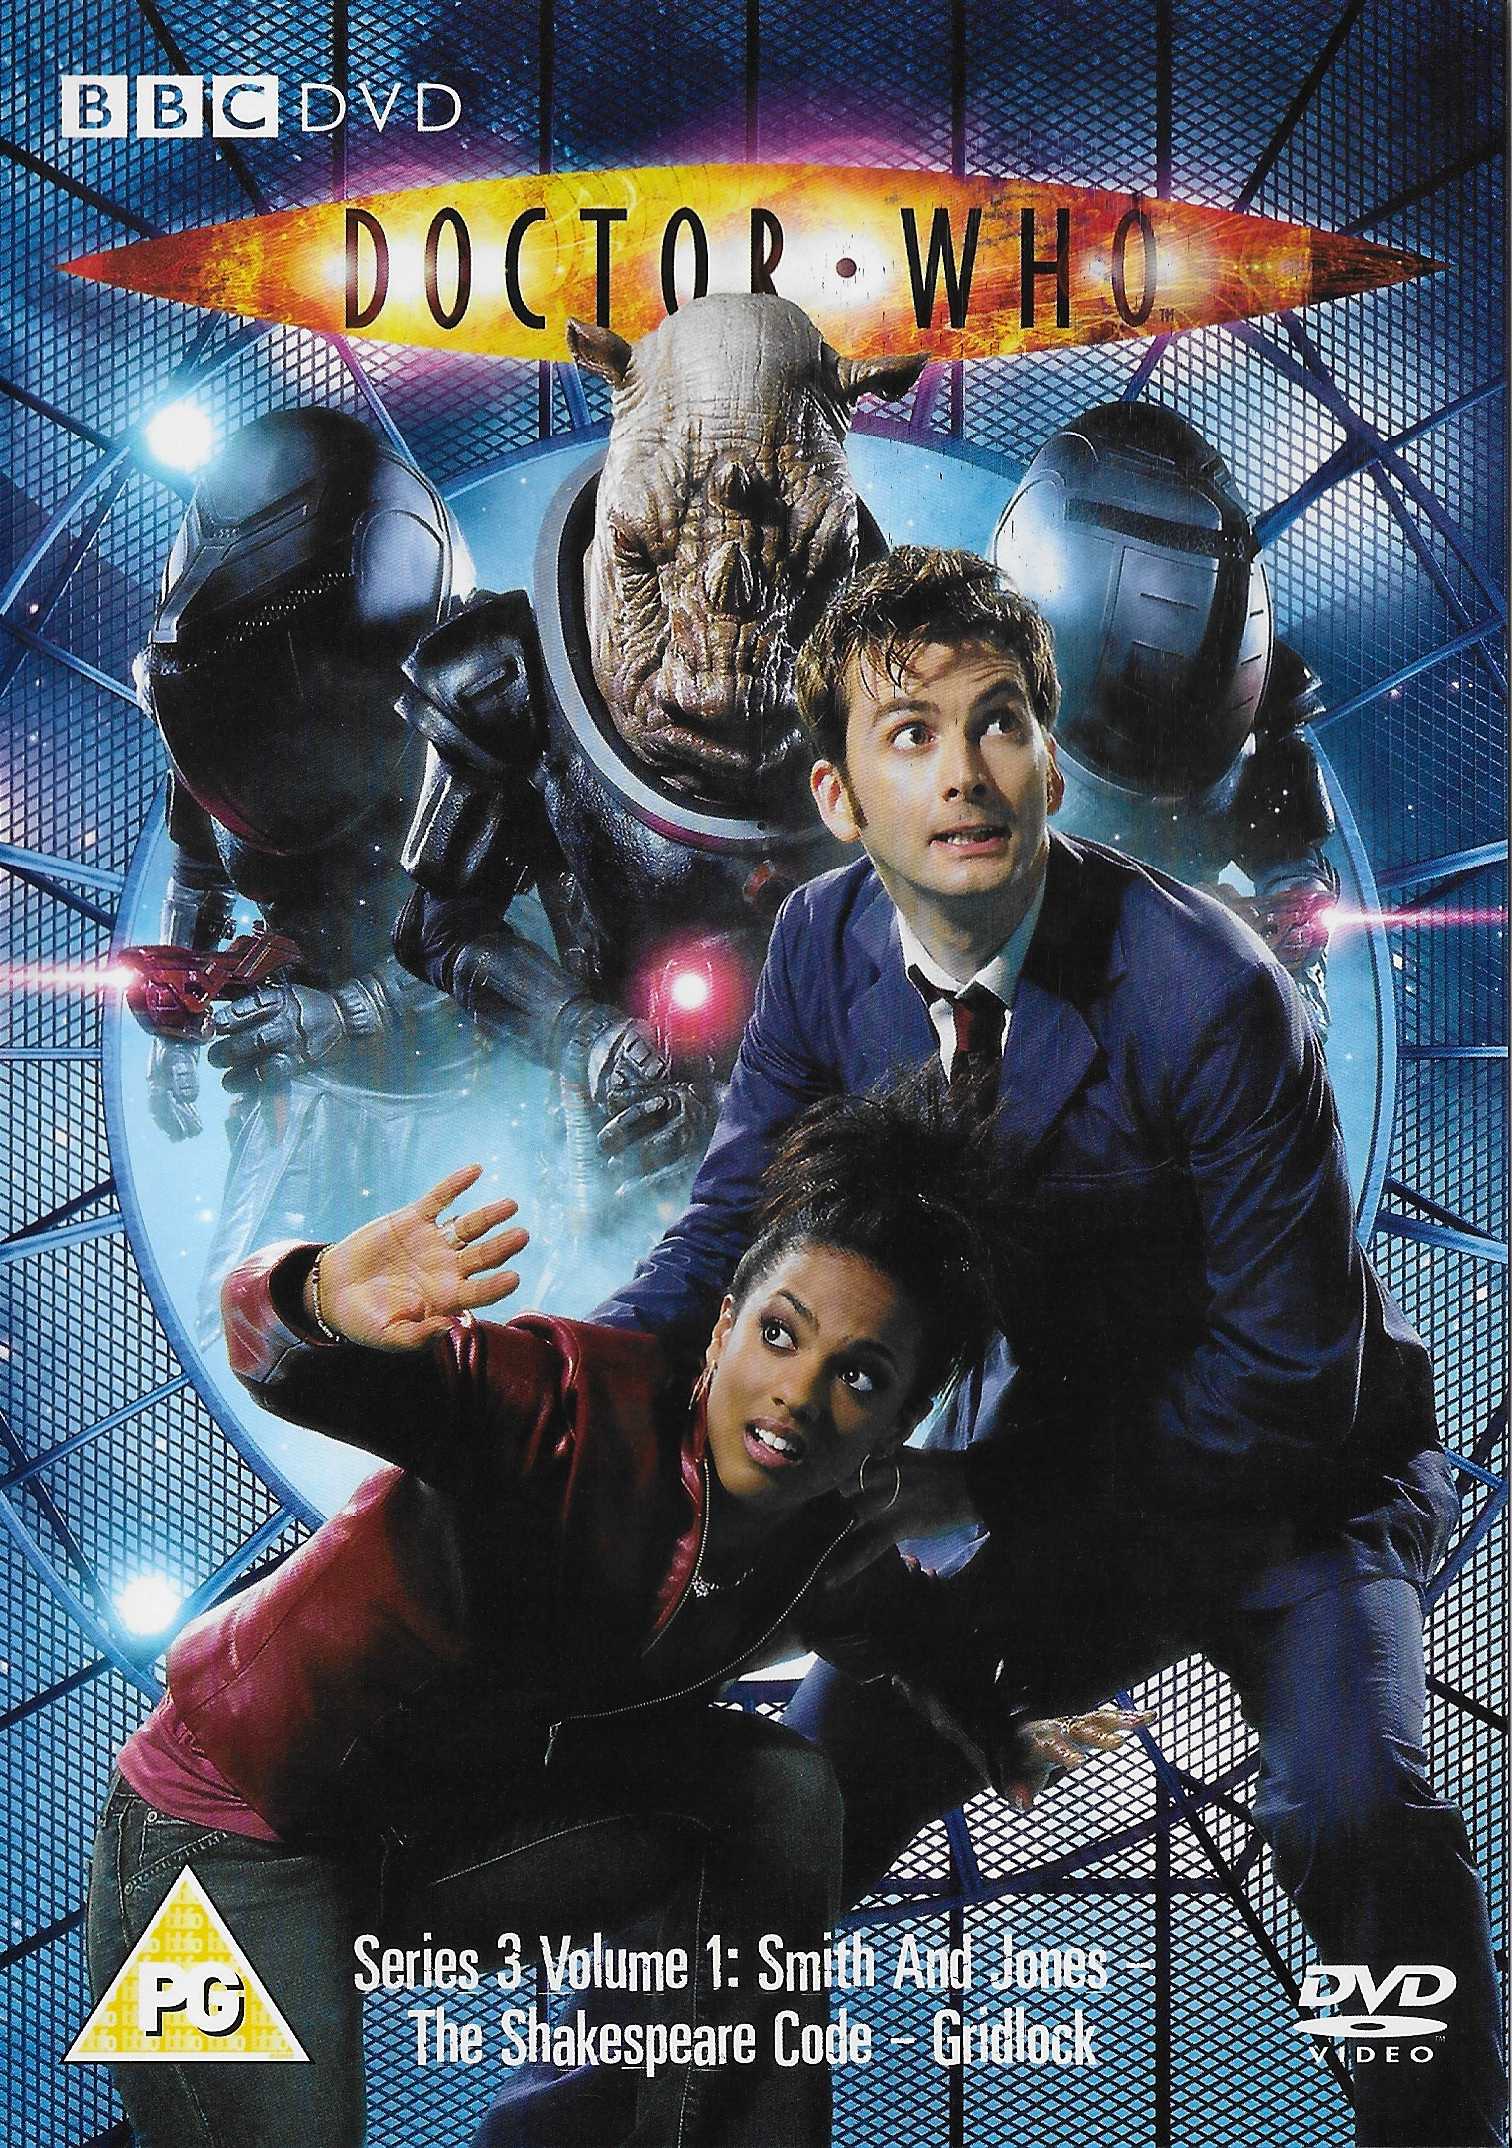 Picture of BBCDVD 2381 Doctor Who - Series 3, volume 1 by artist Russell T Davies / Gareth Roberts from the BBC dvds - Records and Tapes library